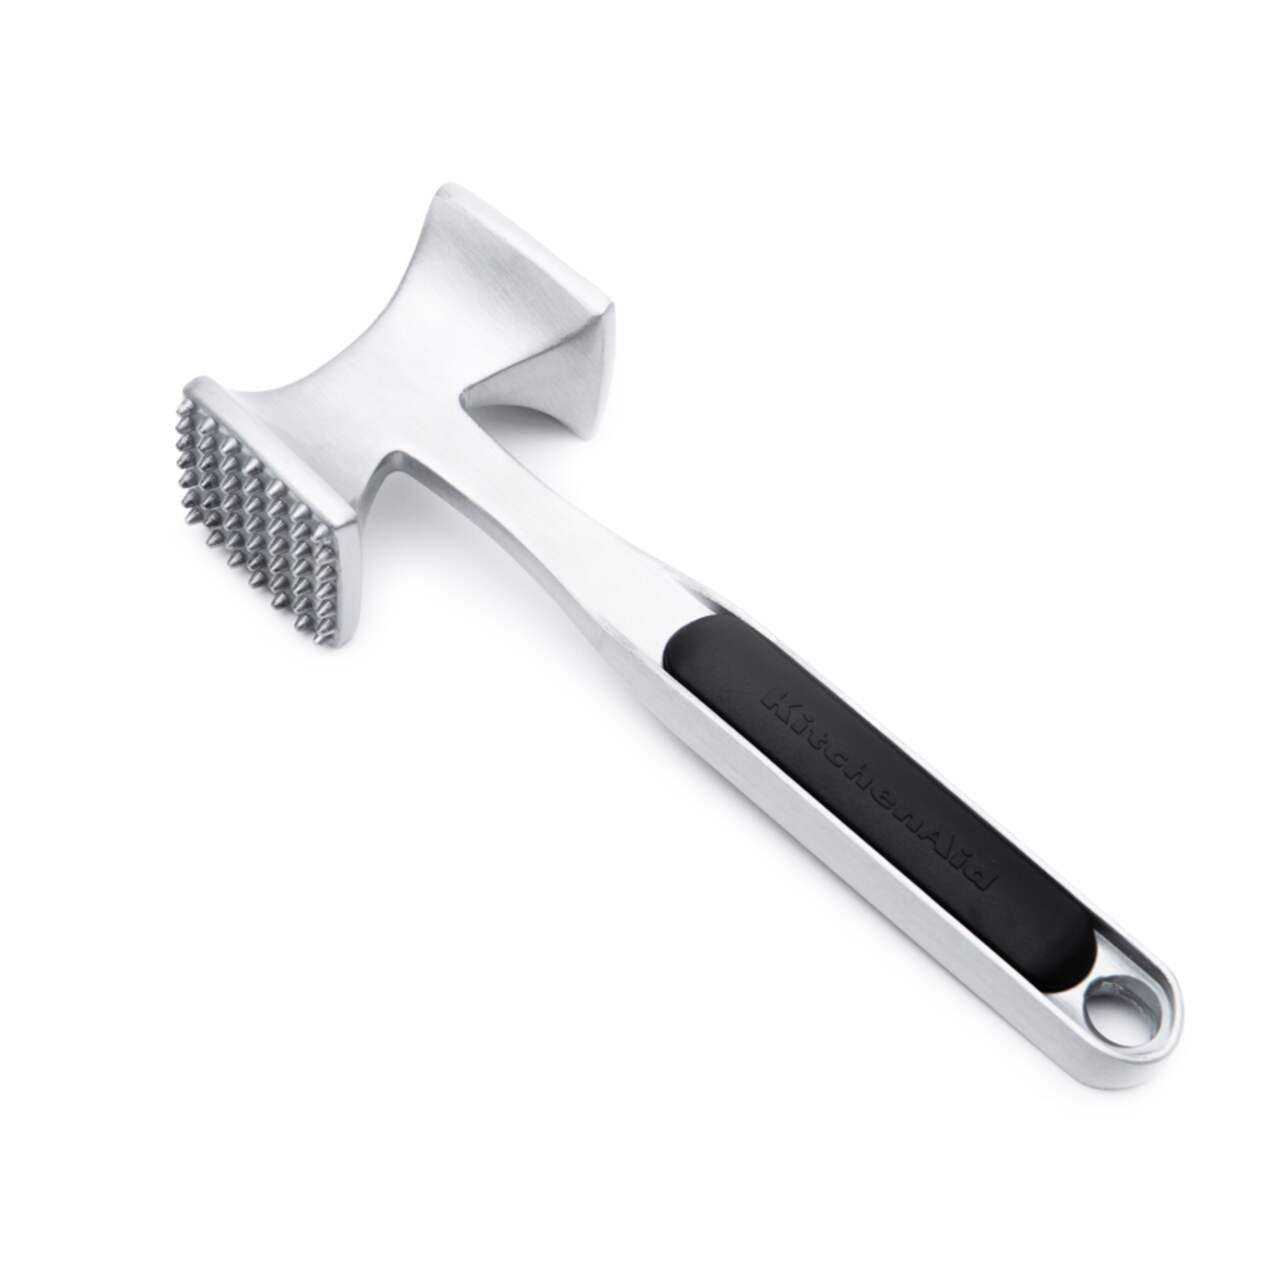 https://media-www.canadiantire.ca/product/living/kitchen/kitchen-tools-thermometers/0424952/kitchen-aid-meat-tenderizer-a8de1beb-7a58-4f77-a29f-ddd259c4cc46.png?imdensity=1&imwidth=640&impolicy=mZoom